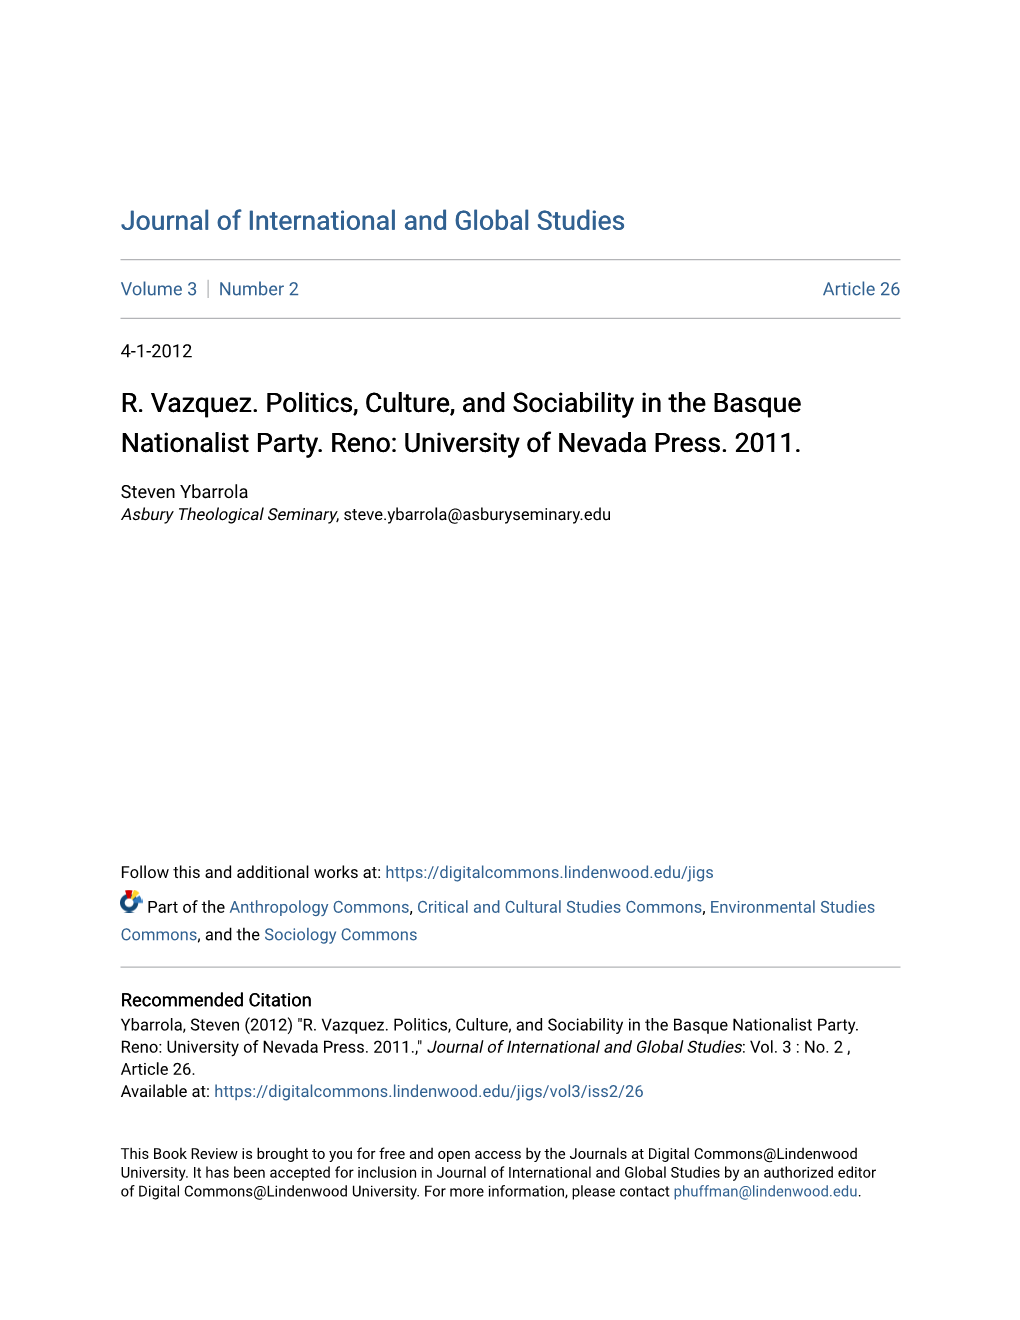 R. Vazquez. Politics, Culture, and Sociability in the Basque Nationalist Party